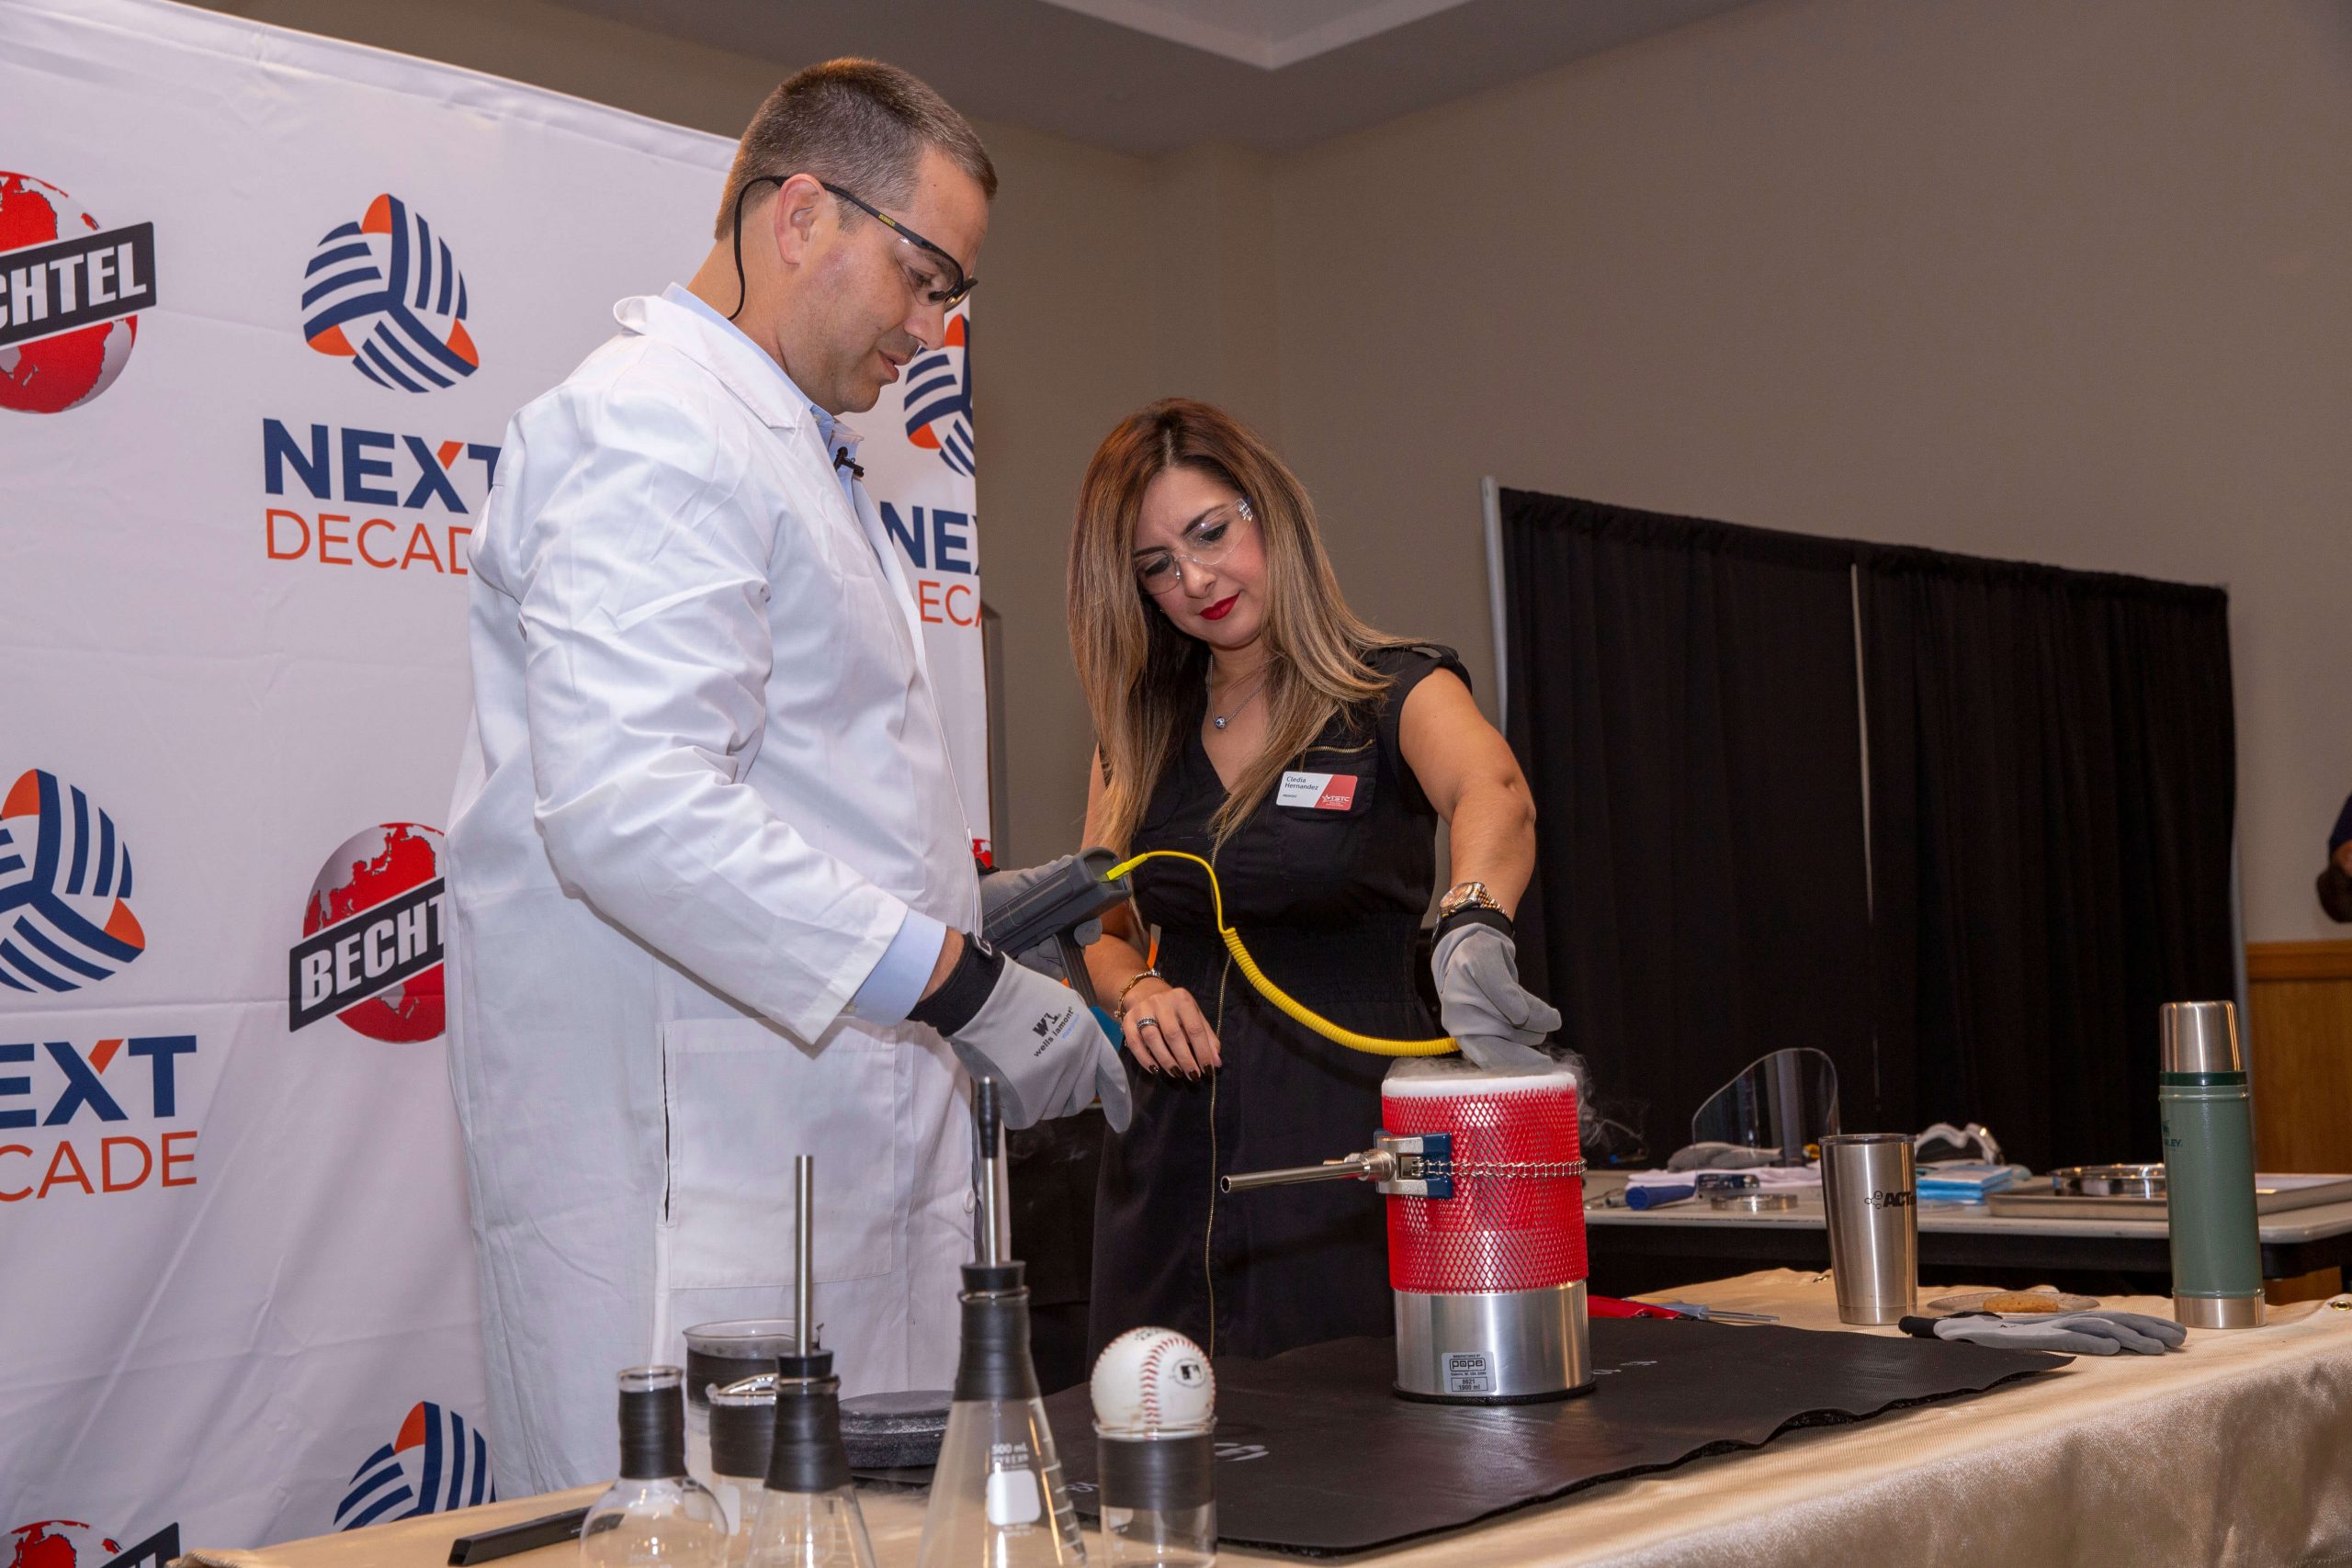 NextDecade and Bechtel host first series of LNG demonstrations in the Rio Grande Valley